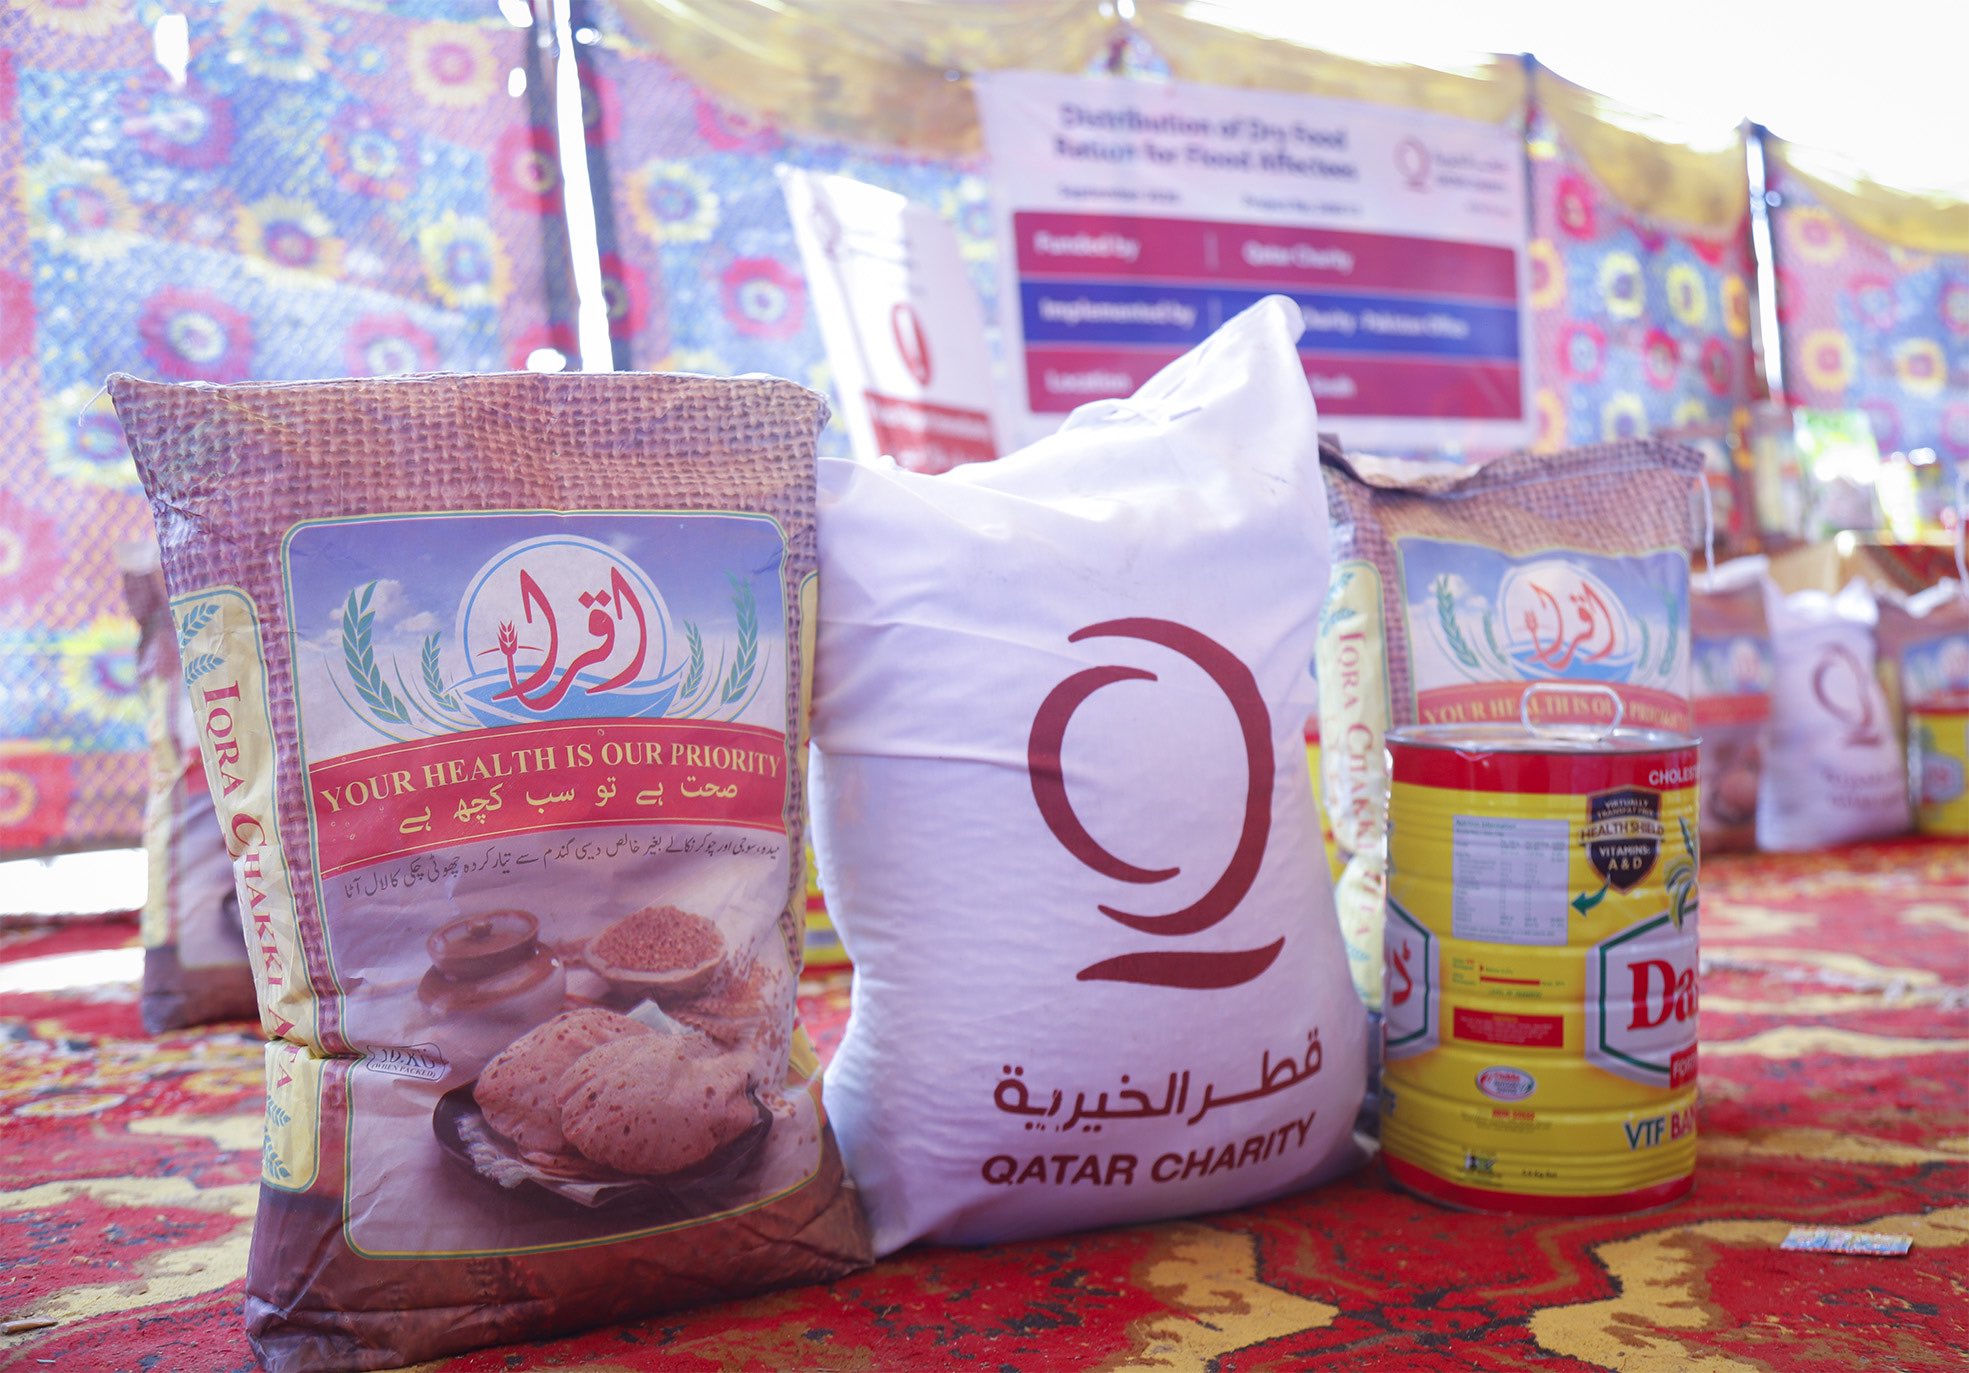 Qatar Charity Delivers Aid to People Affected by Floods in Pakistan